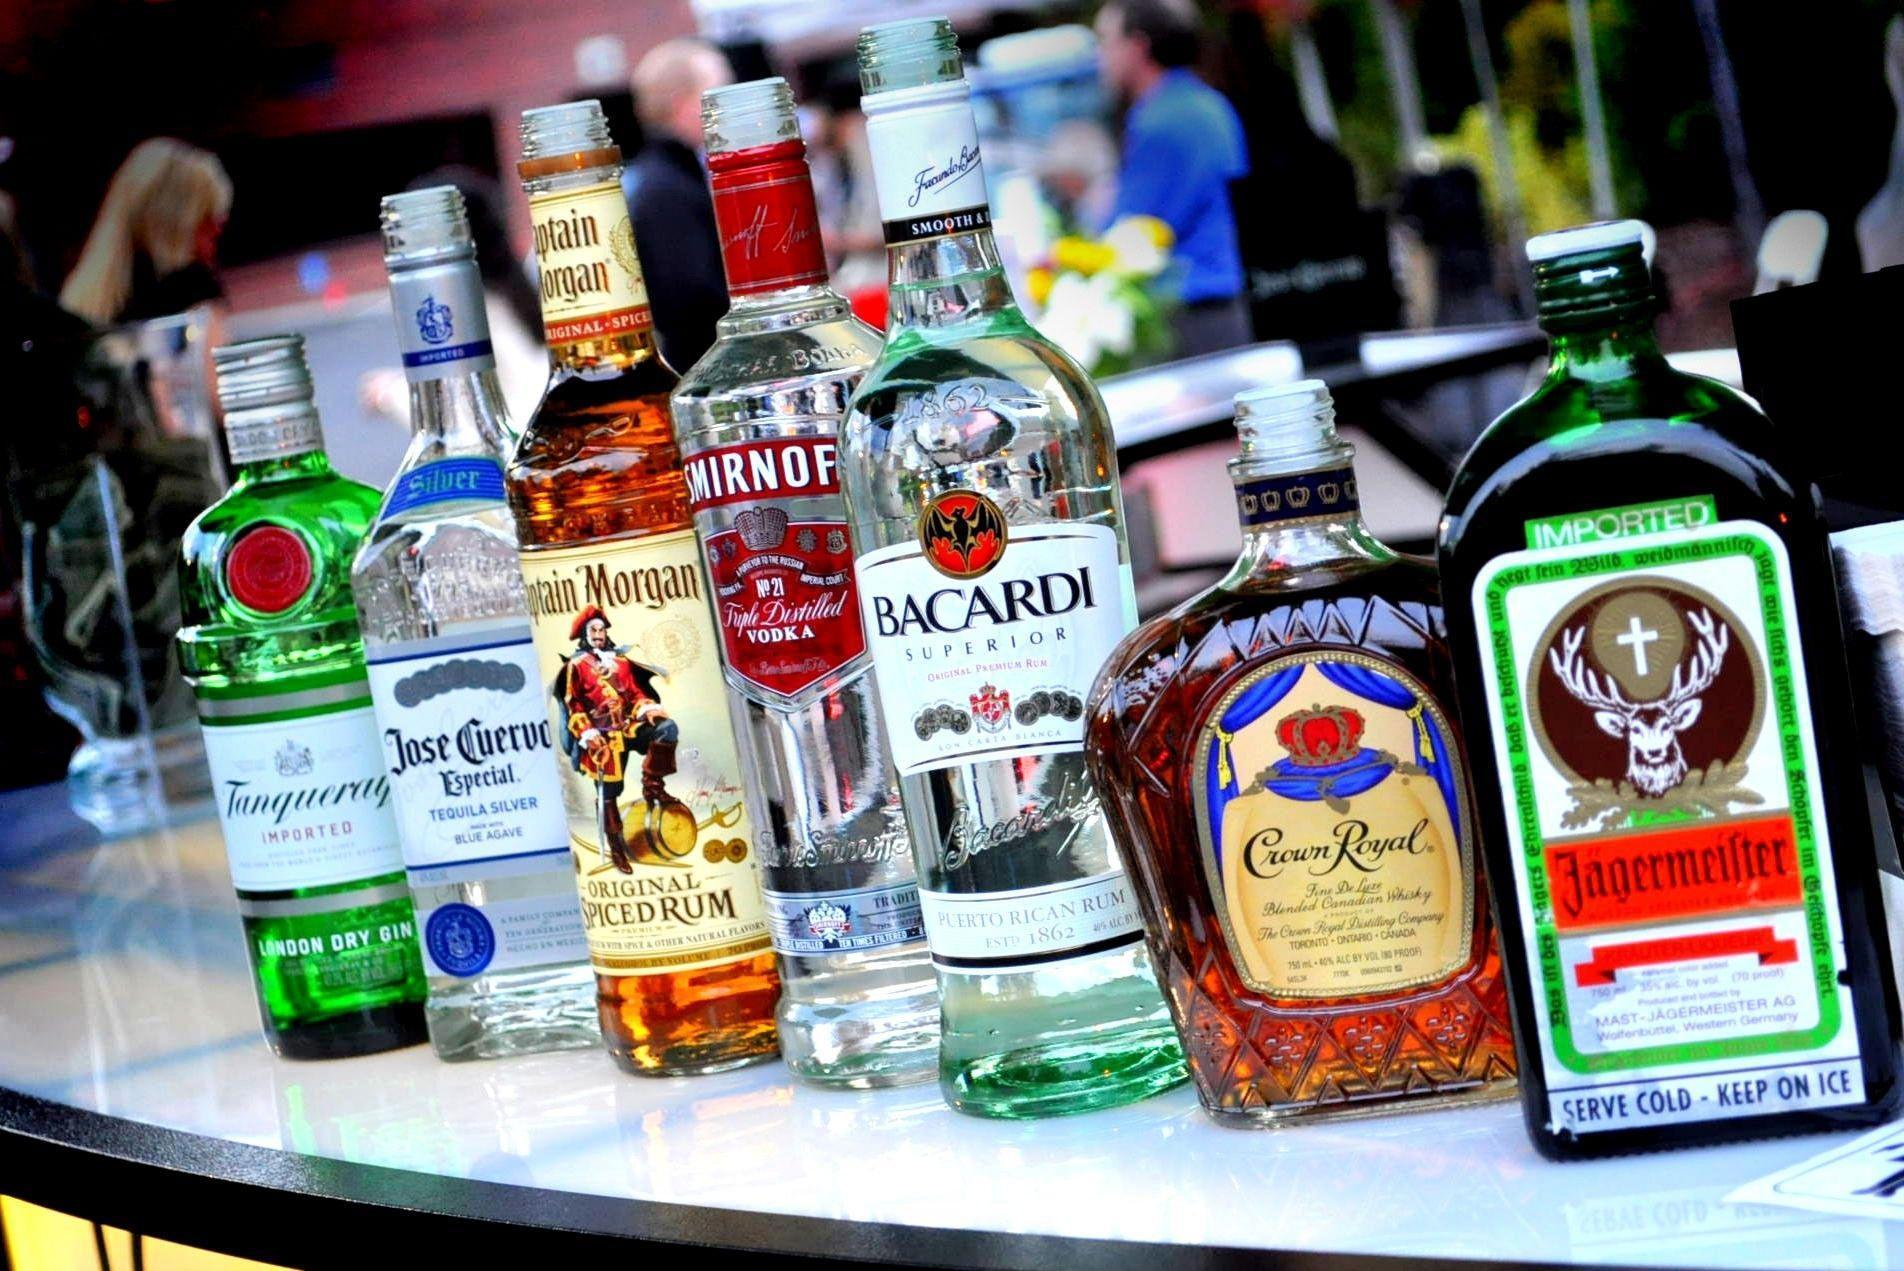 bottles, alcohol, Jagermeister, liquor, Crown Royal, Tanqueray